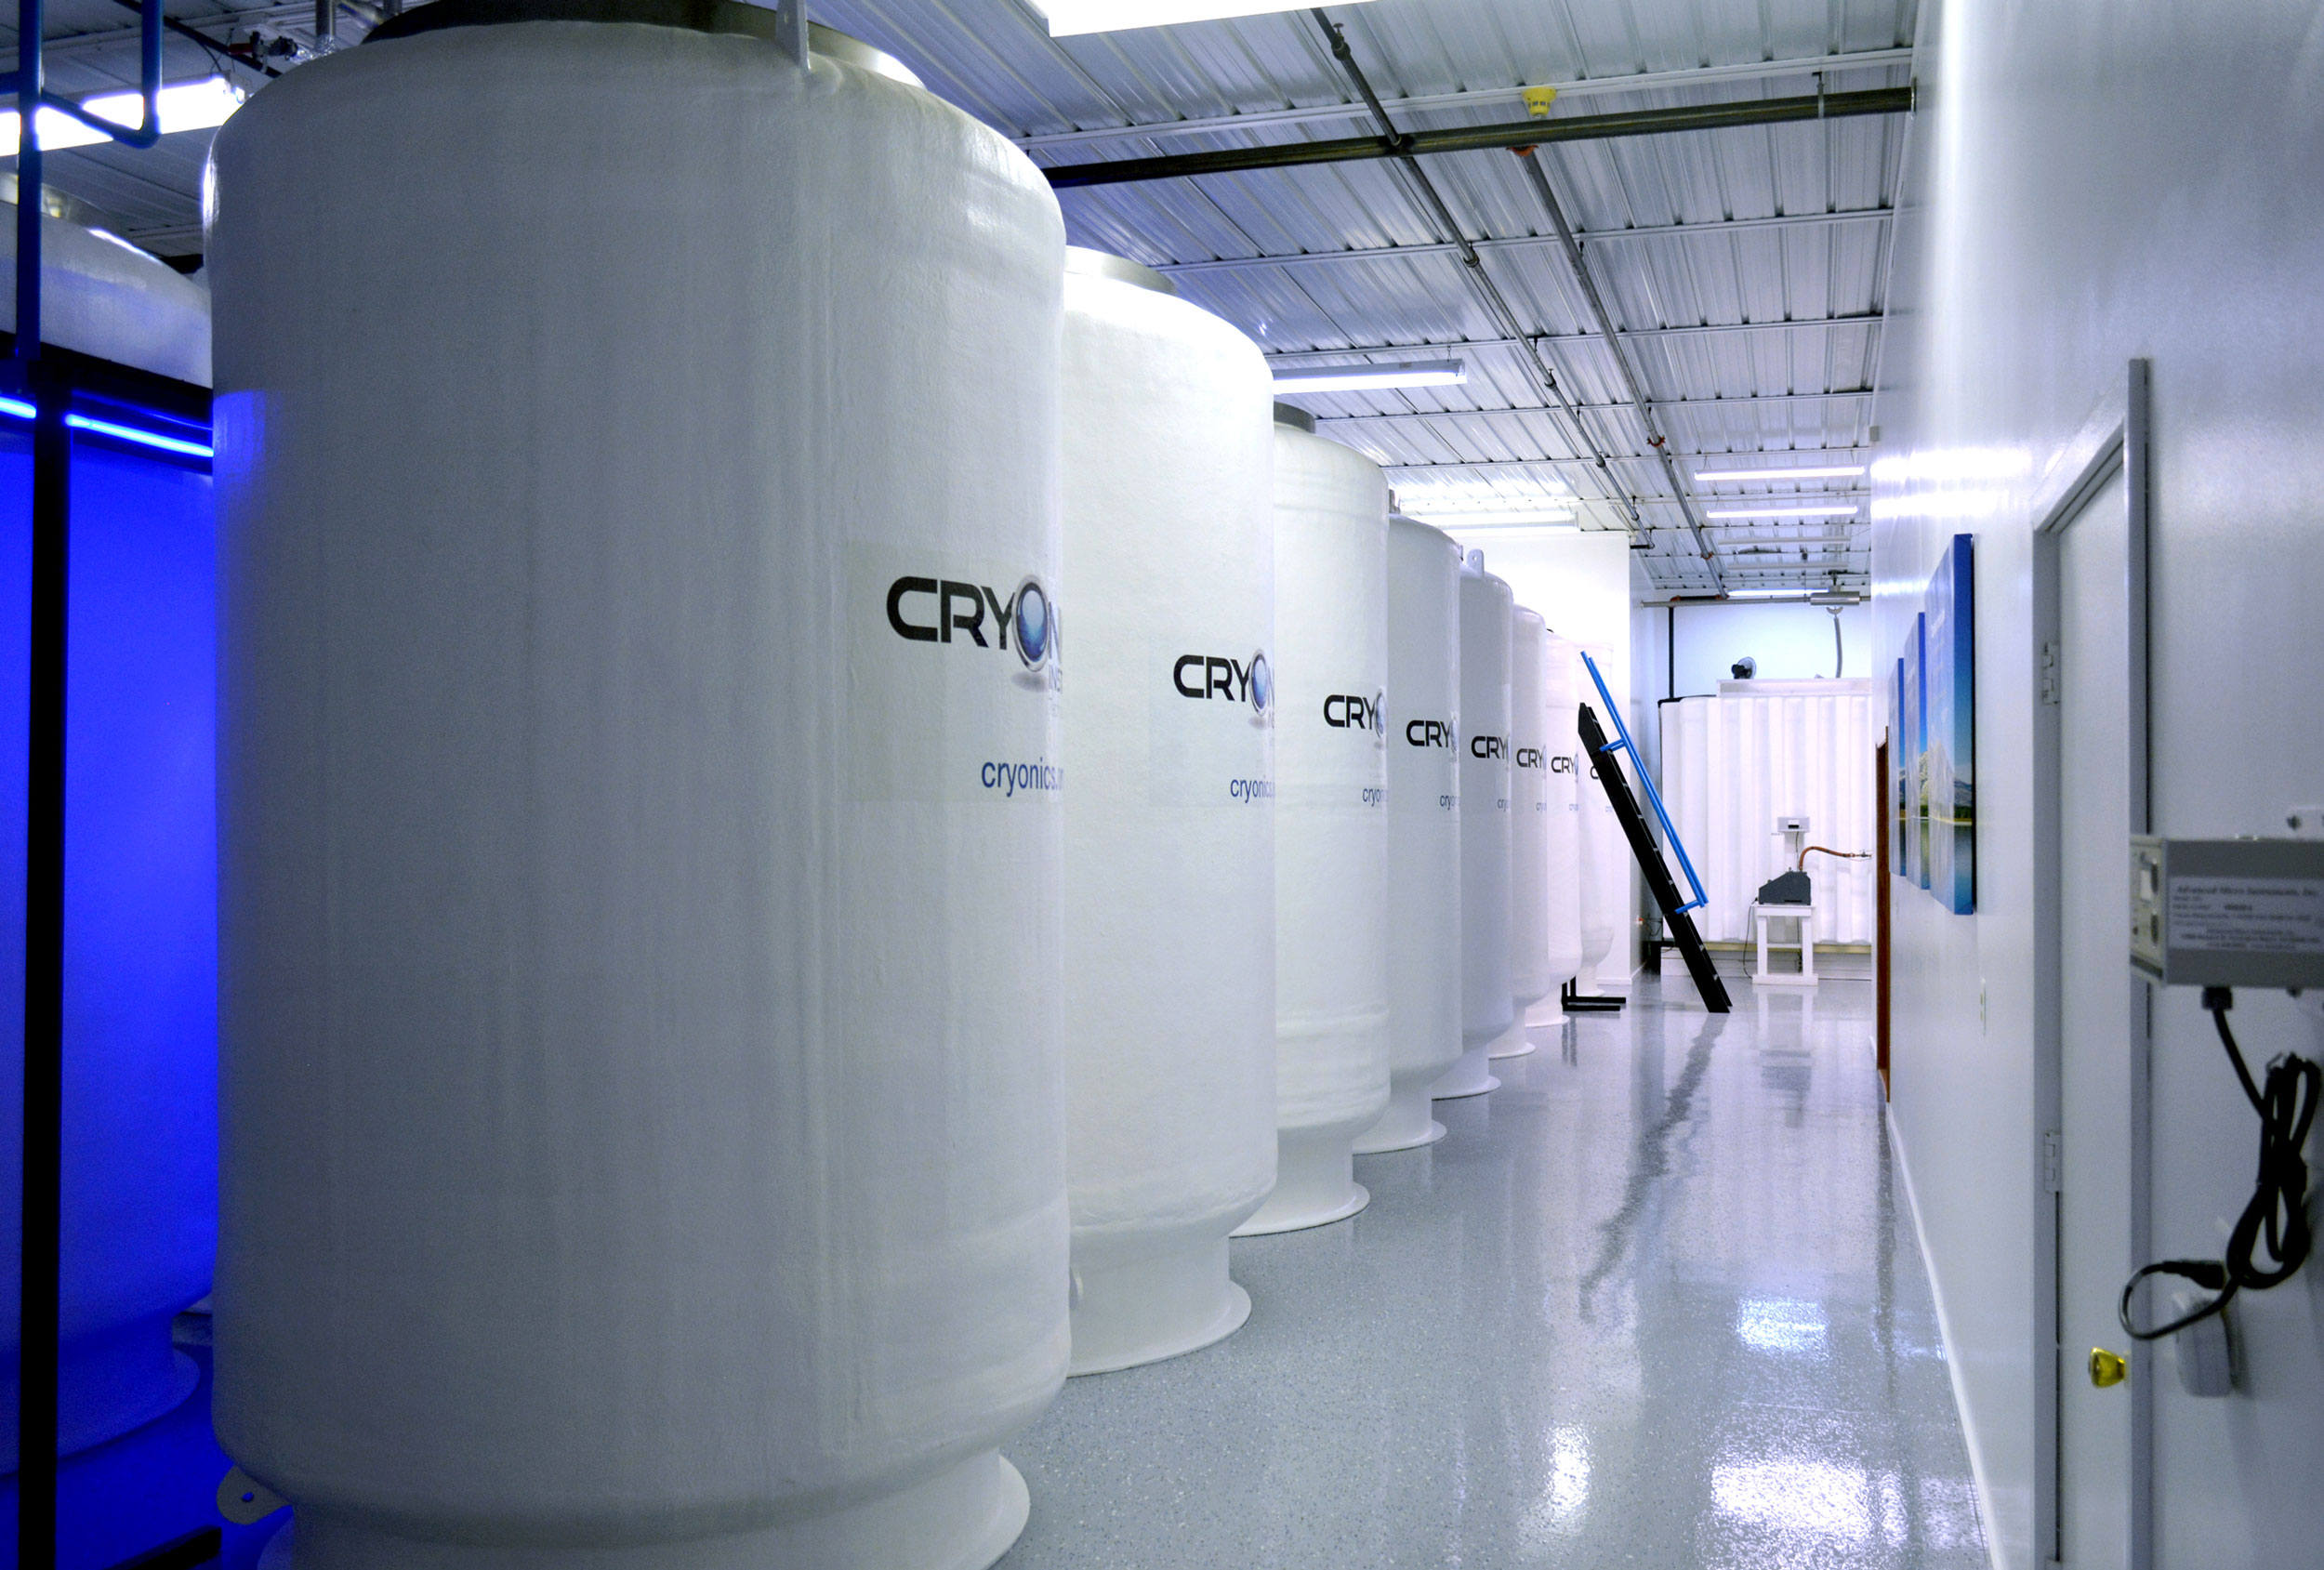 Cryonics: What It's Like to Be Frozen for Future Revival